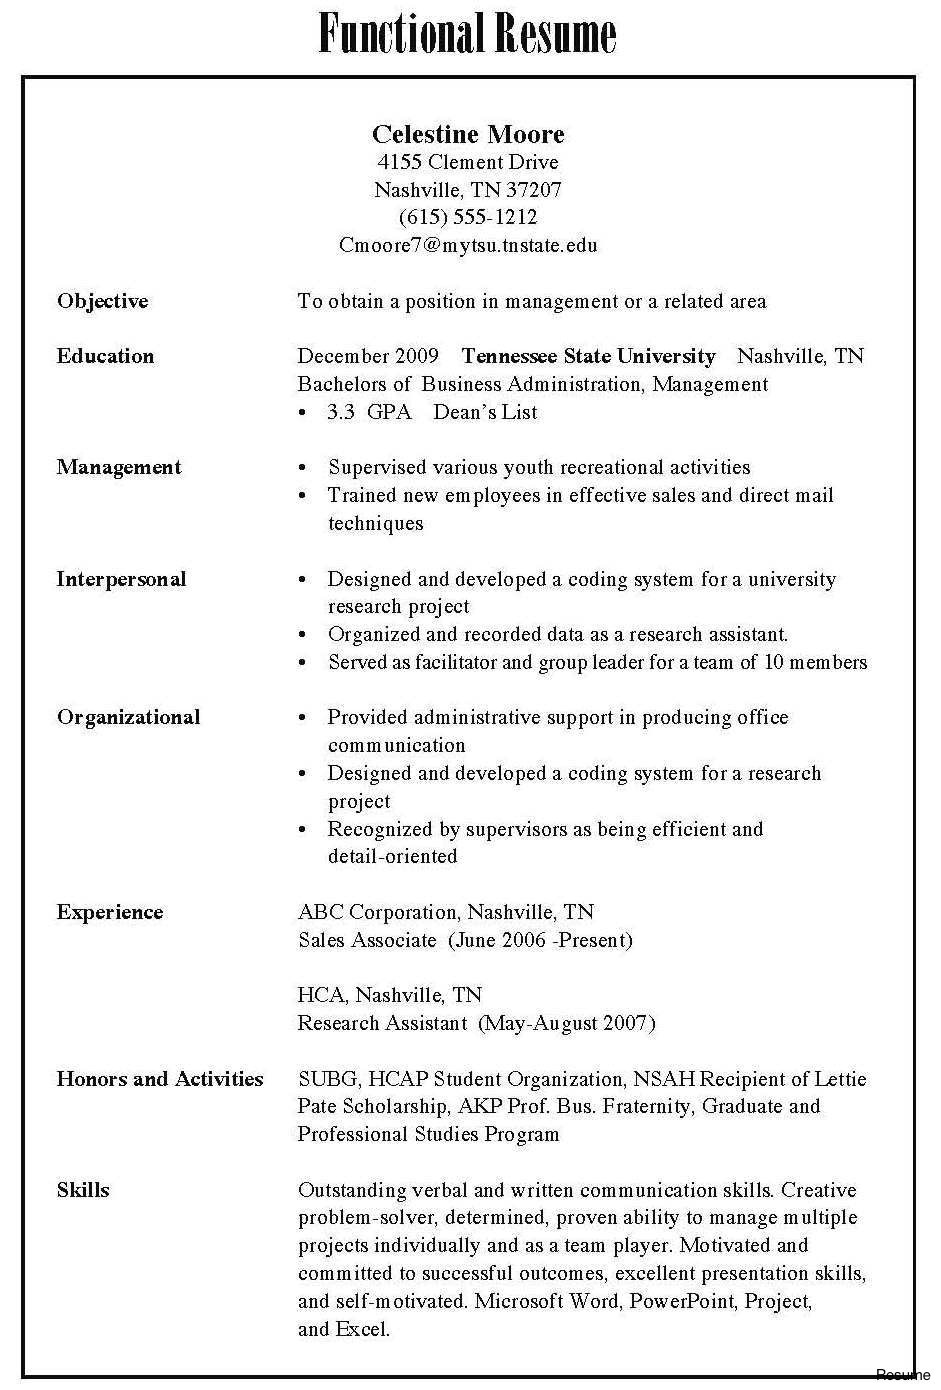 How To Type A Resume Best Resumes Formats Best Ideas Of Three Types Resume Formats Nice Reverse Chronological Format Two Resumes 3 20 Type Of Resume Is Best how to type a resume|wikiresume.com